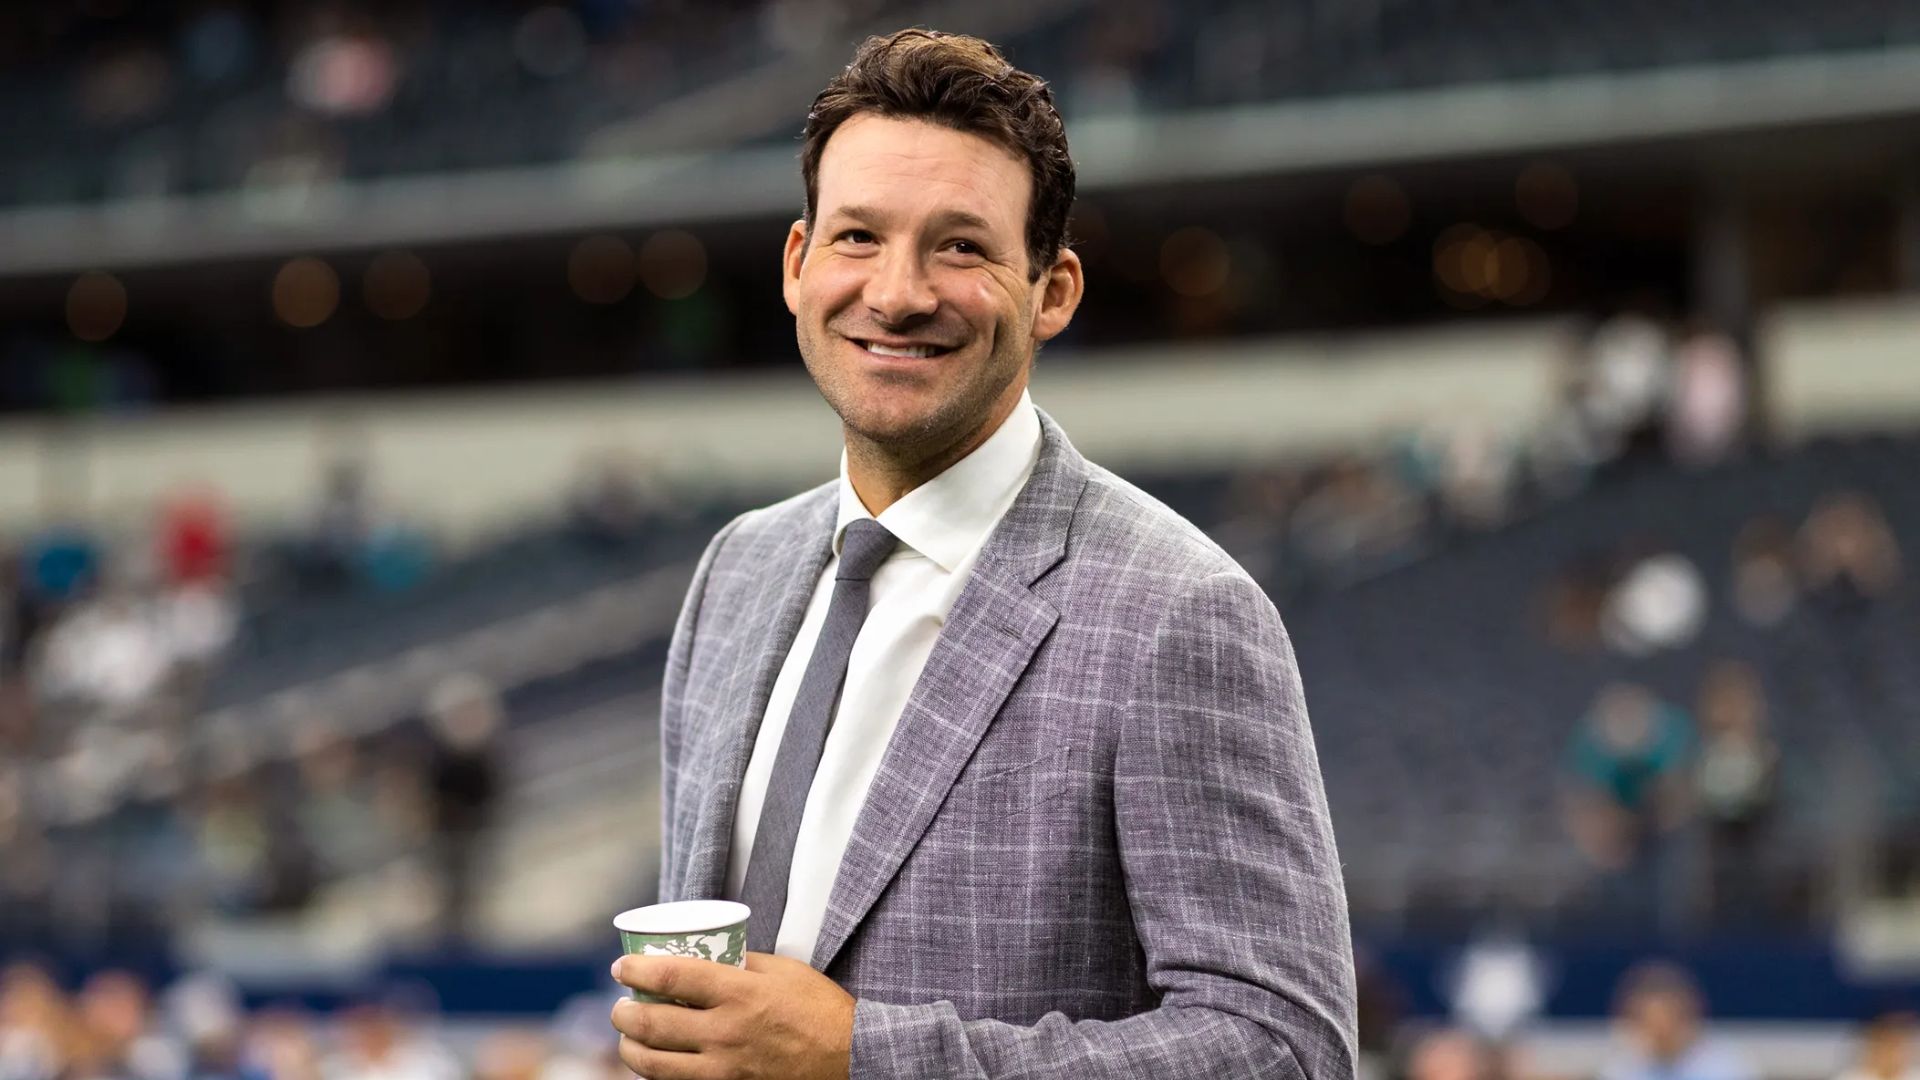 Tony Romo With A Little Smile On Face